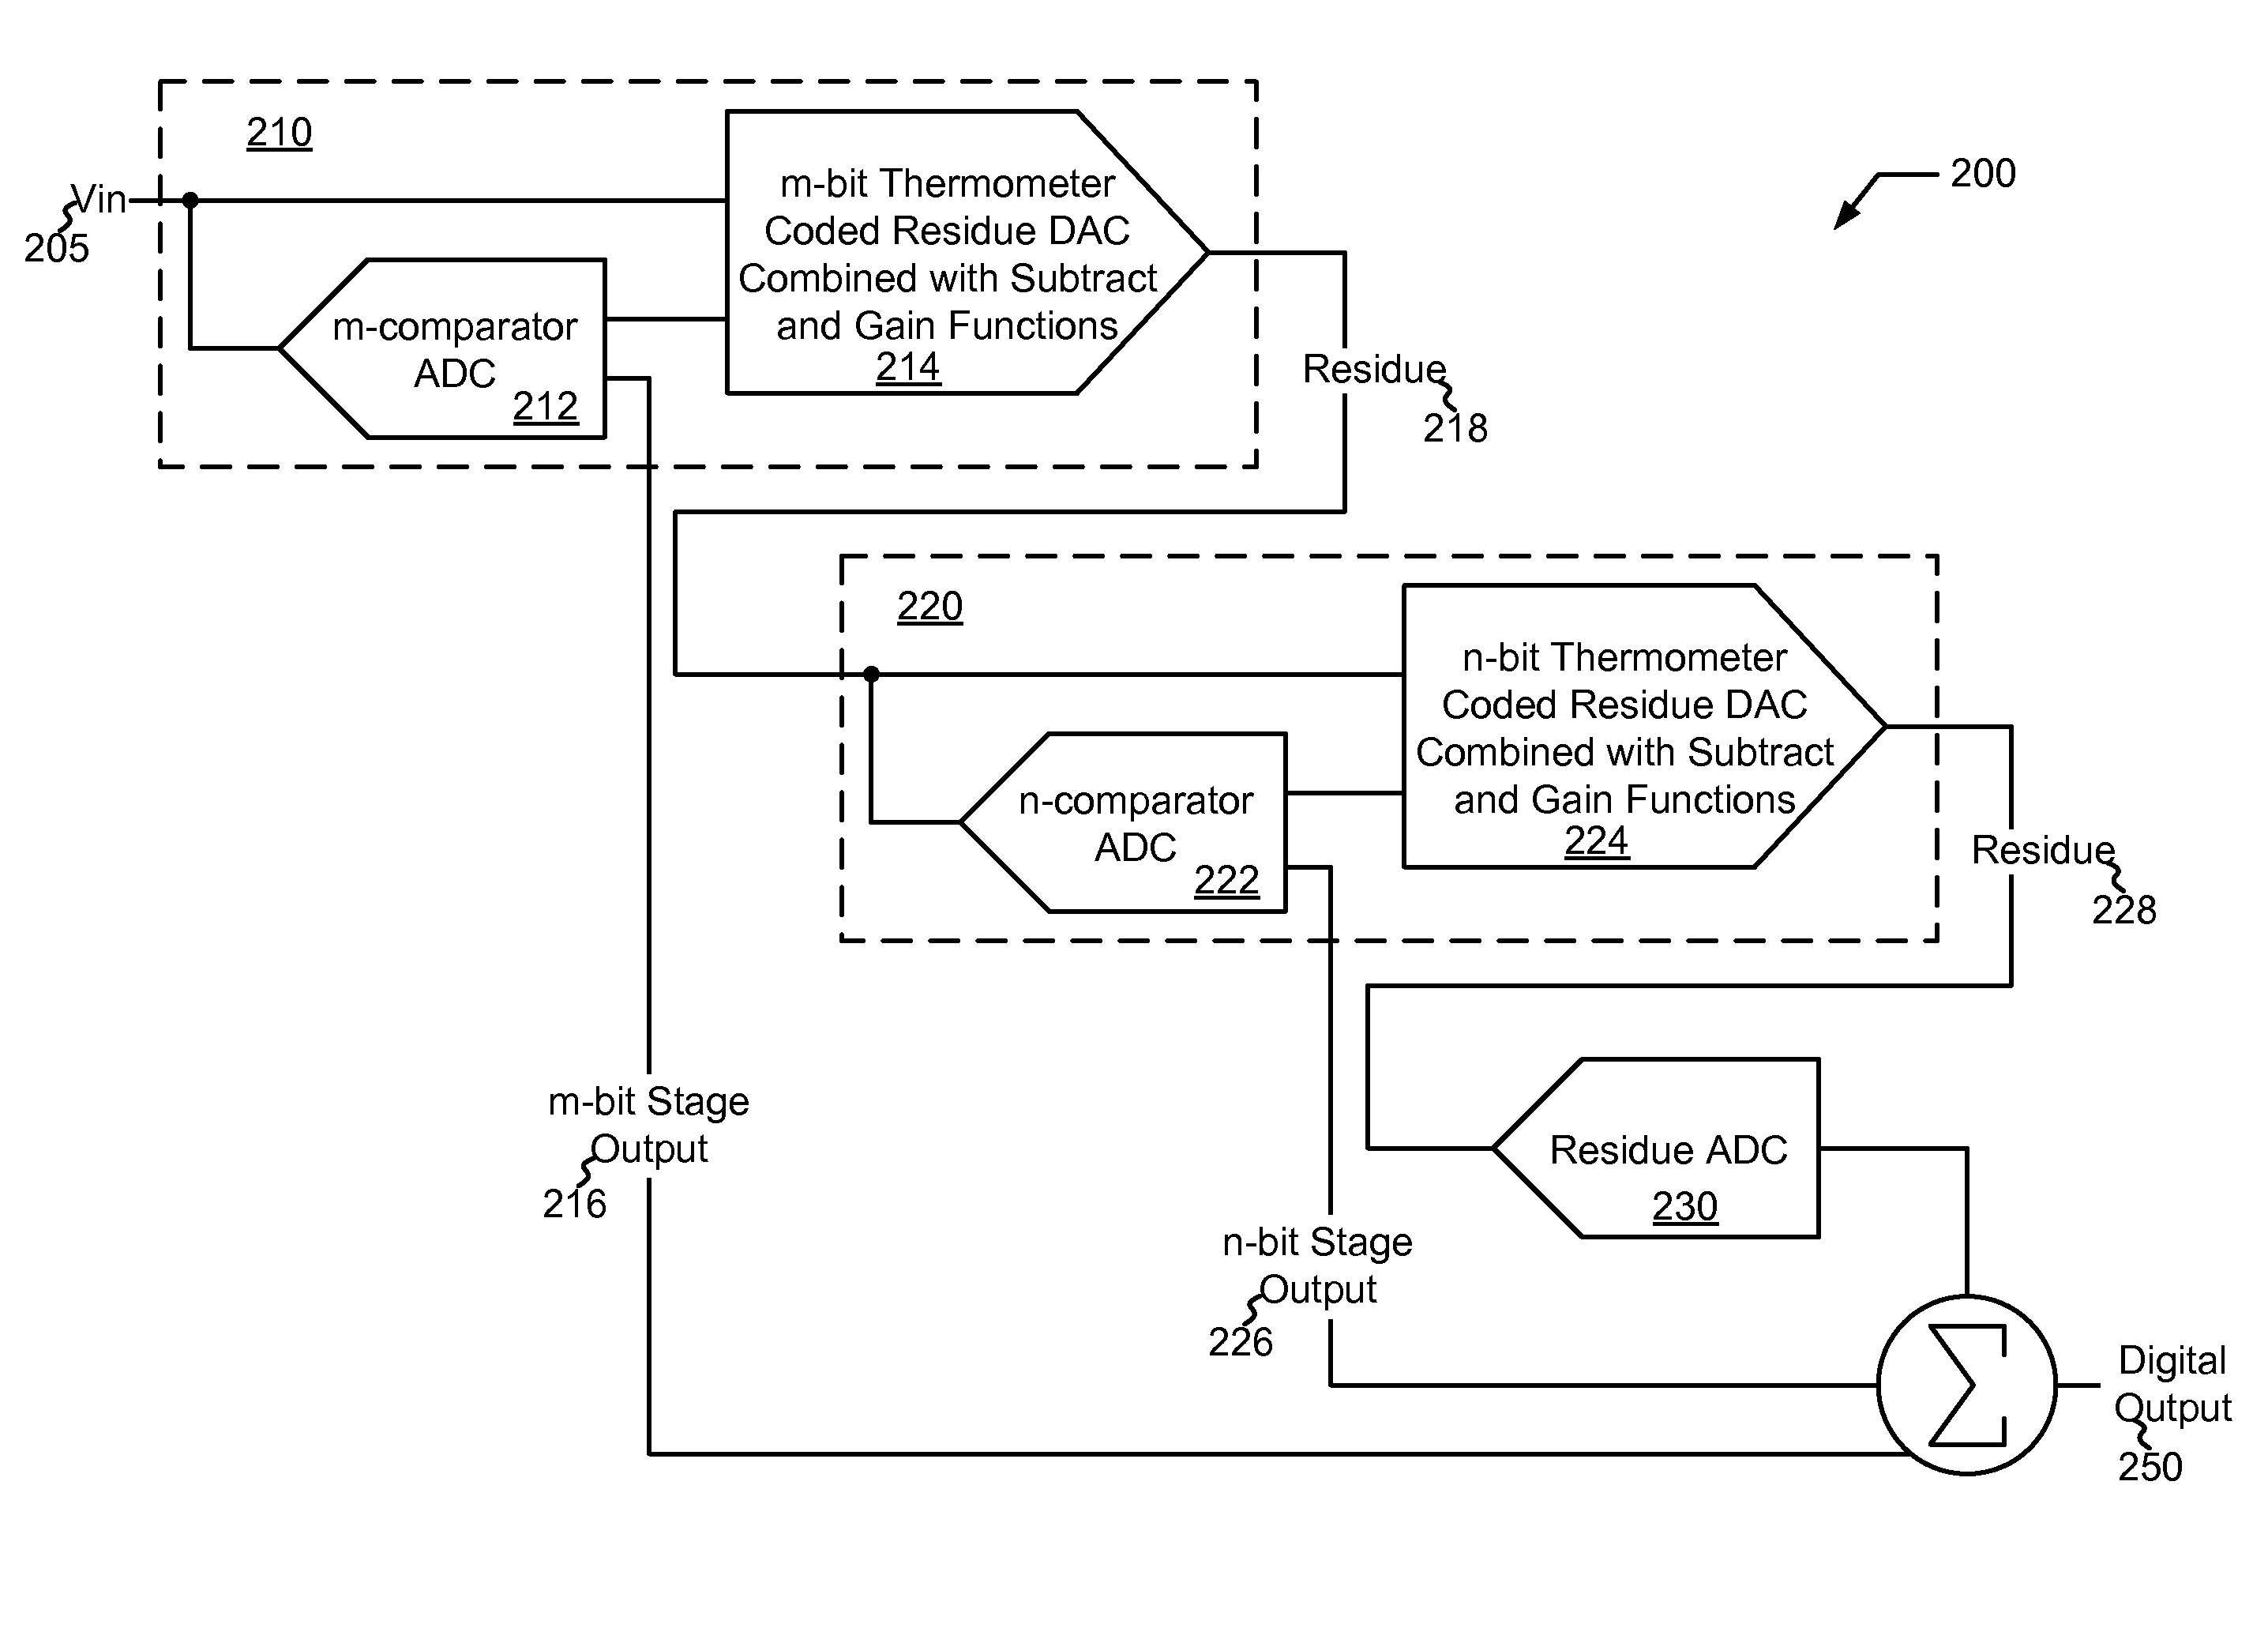 Multi-bit per stage pipelined analog to digital converters